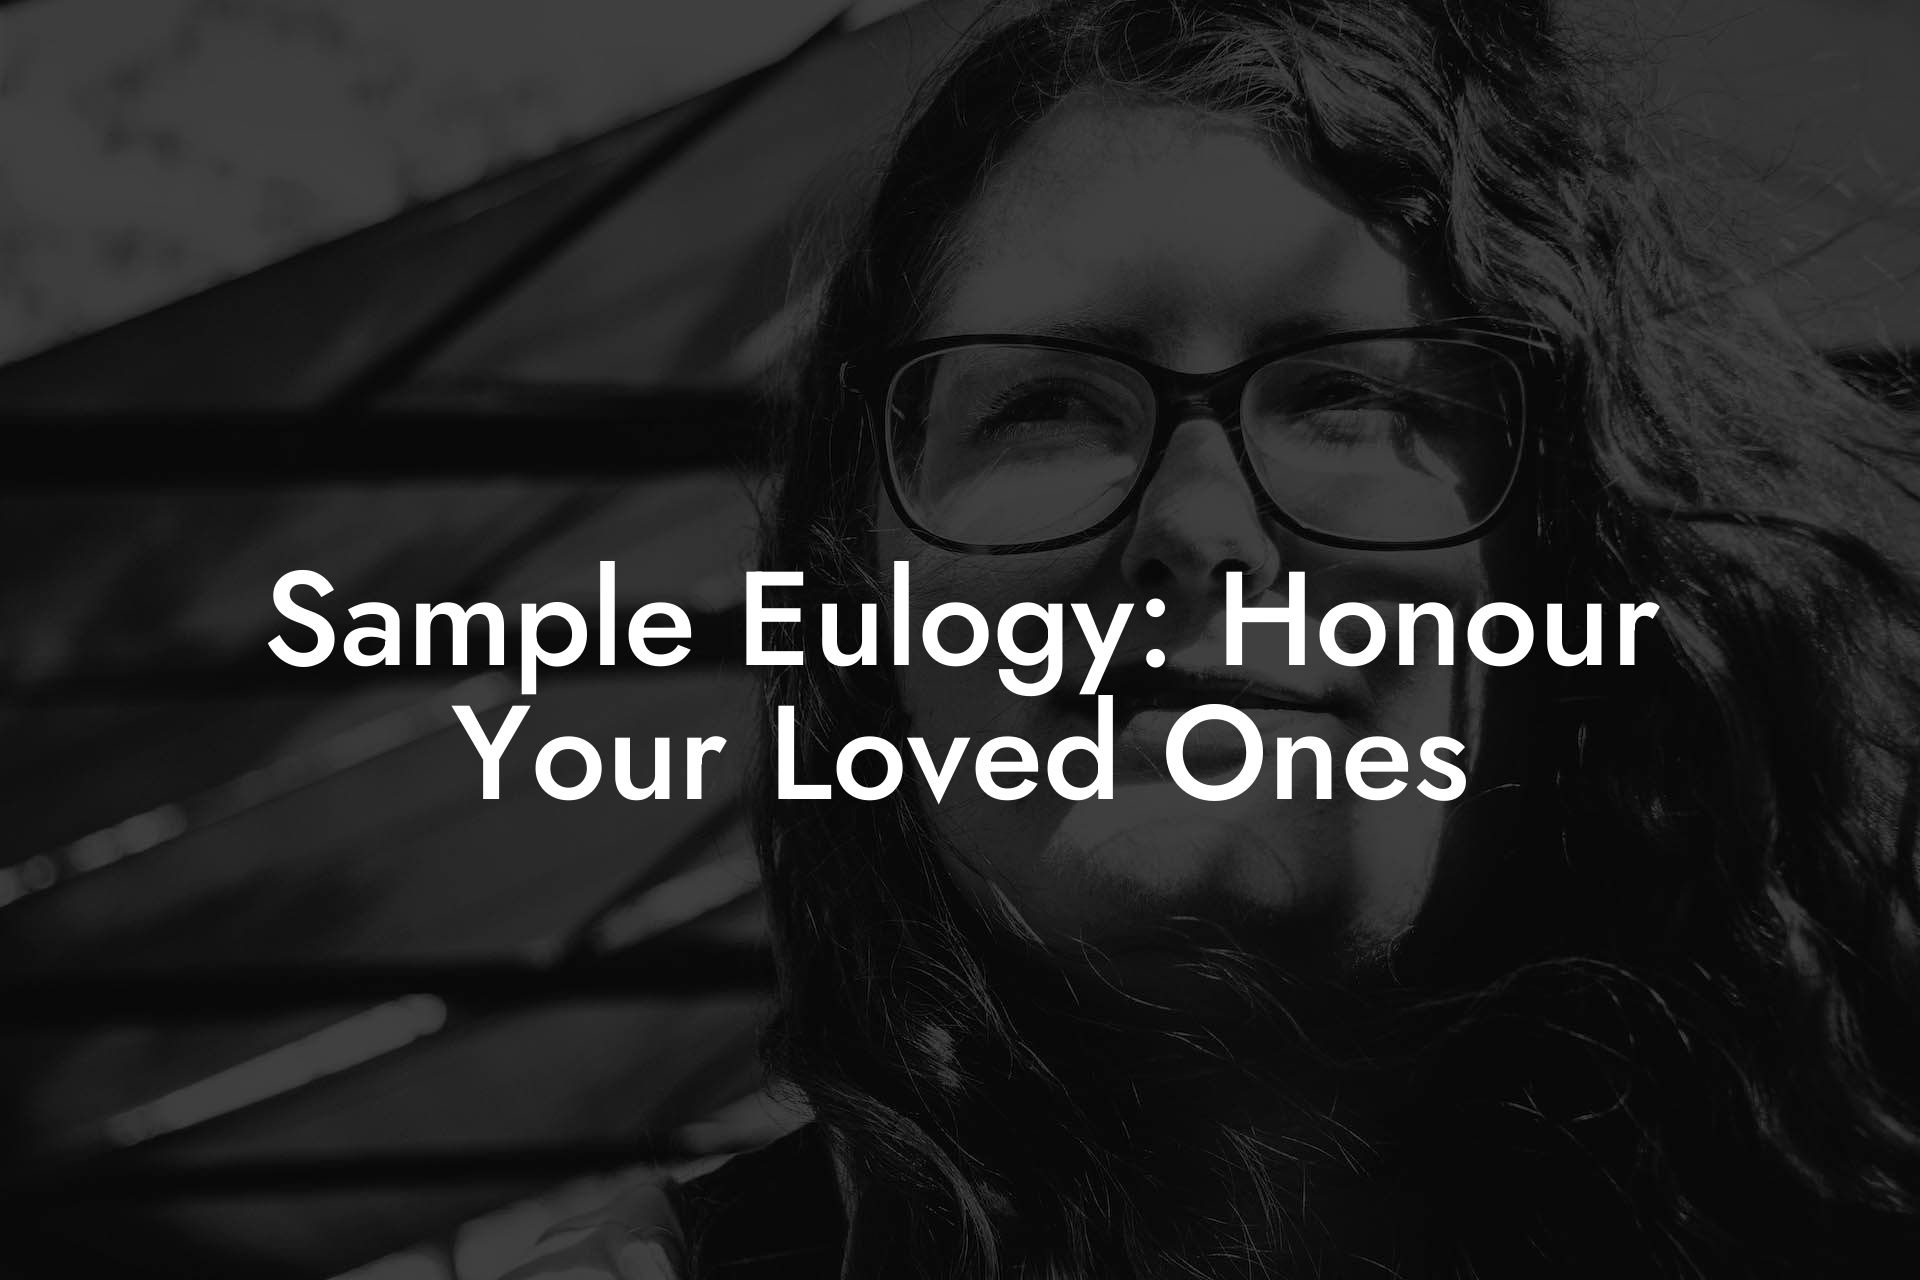 Sample Eulogy: Honour Your Loved Ones